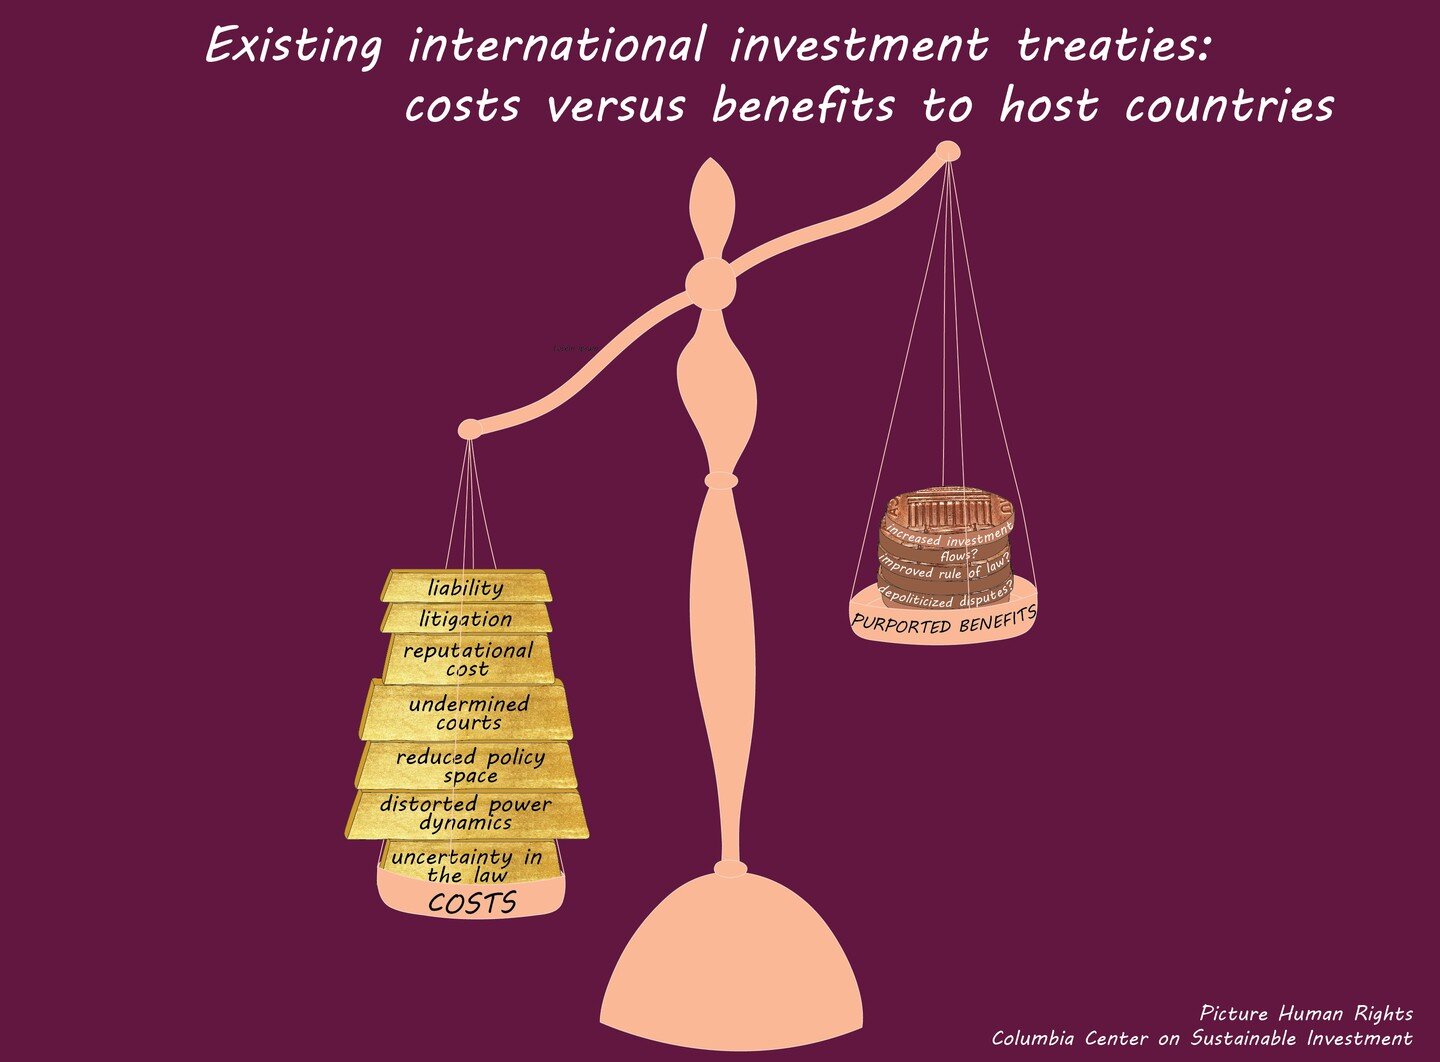 Two decades of practice have shown that the financial and regulatory costs of signing IITs outweigh the benefits.

#humanrights #internationallaw #illustration #AdobeIllustrator #apicturesaysathousandwords #ISDS #investment #investmentlaw